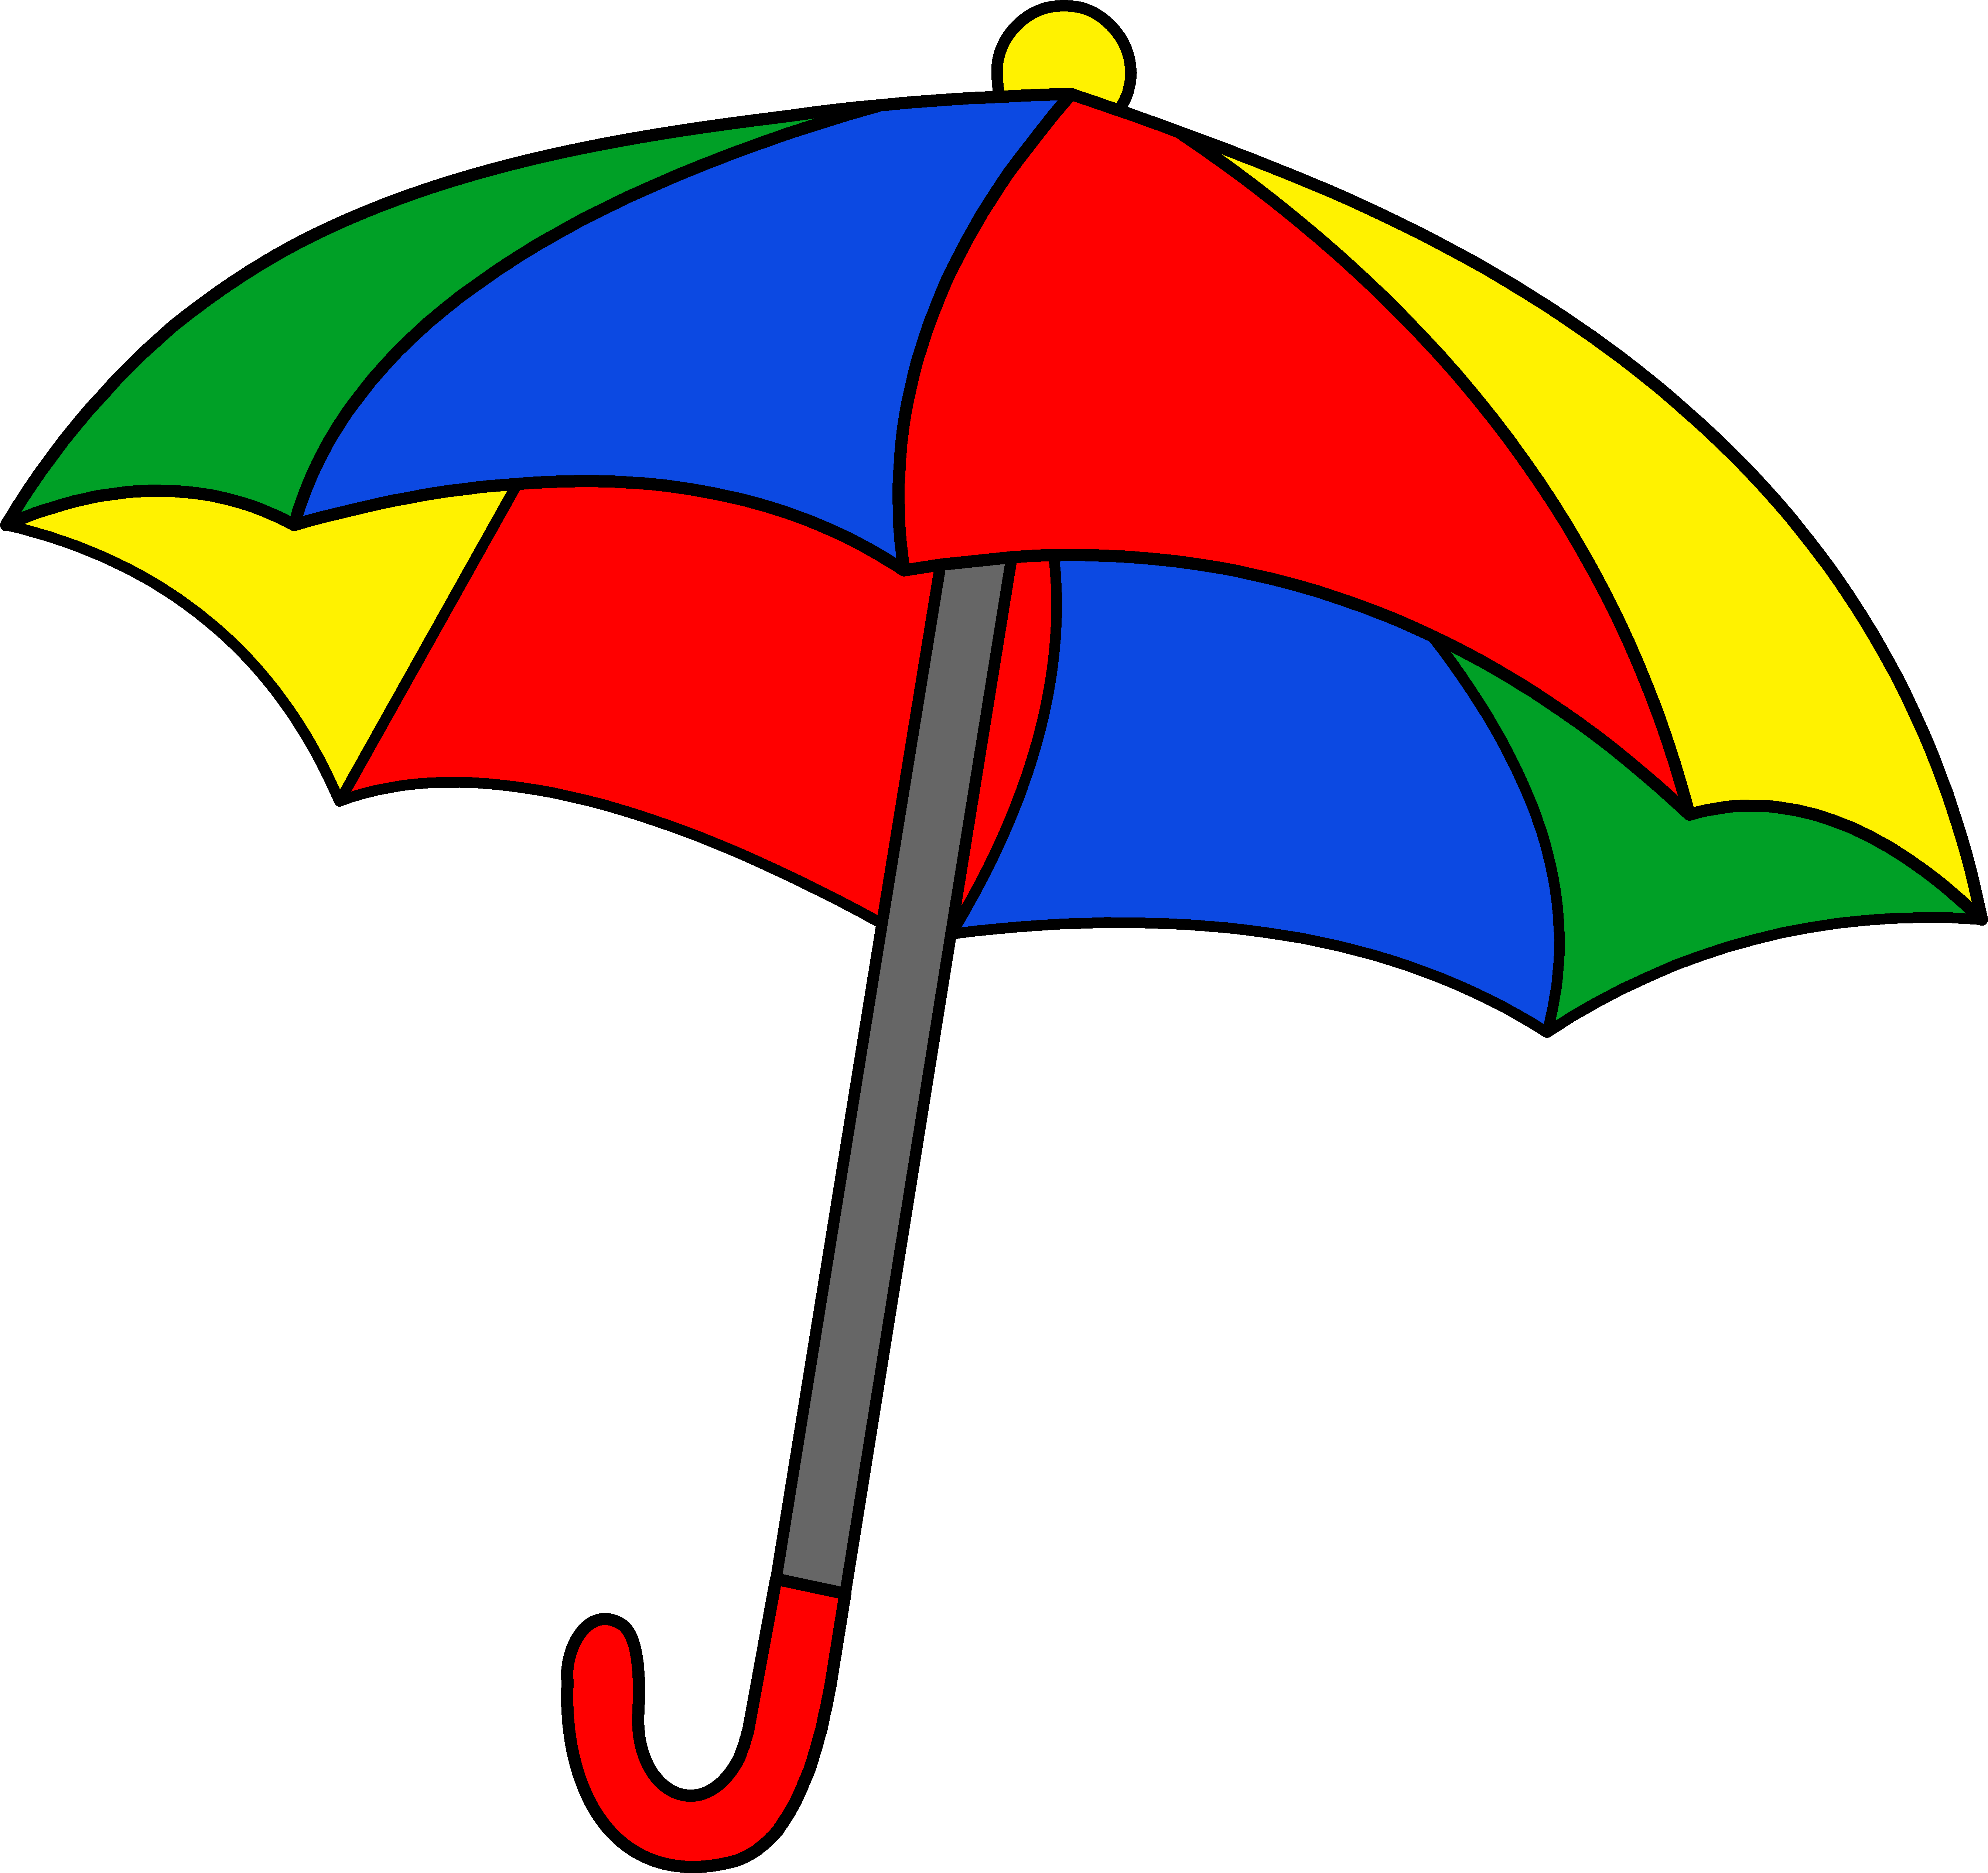 Free Picture Of An Umbrella, Download Free Picture Of An Umbrella png